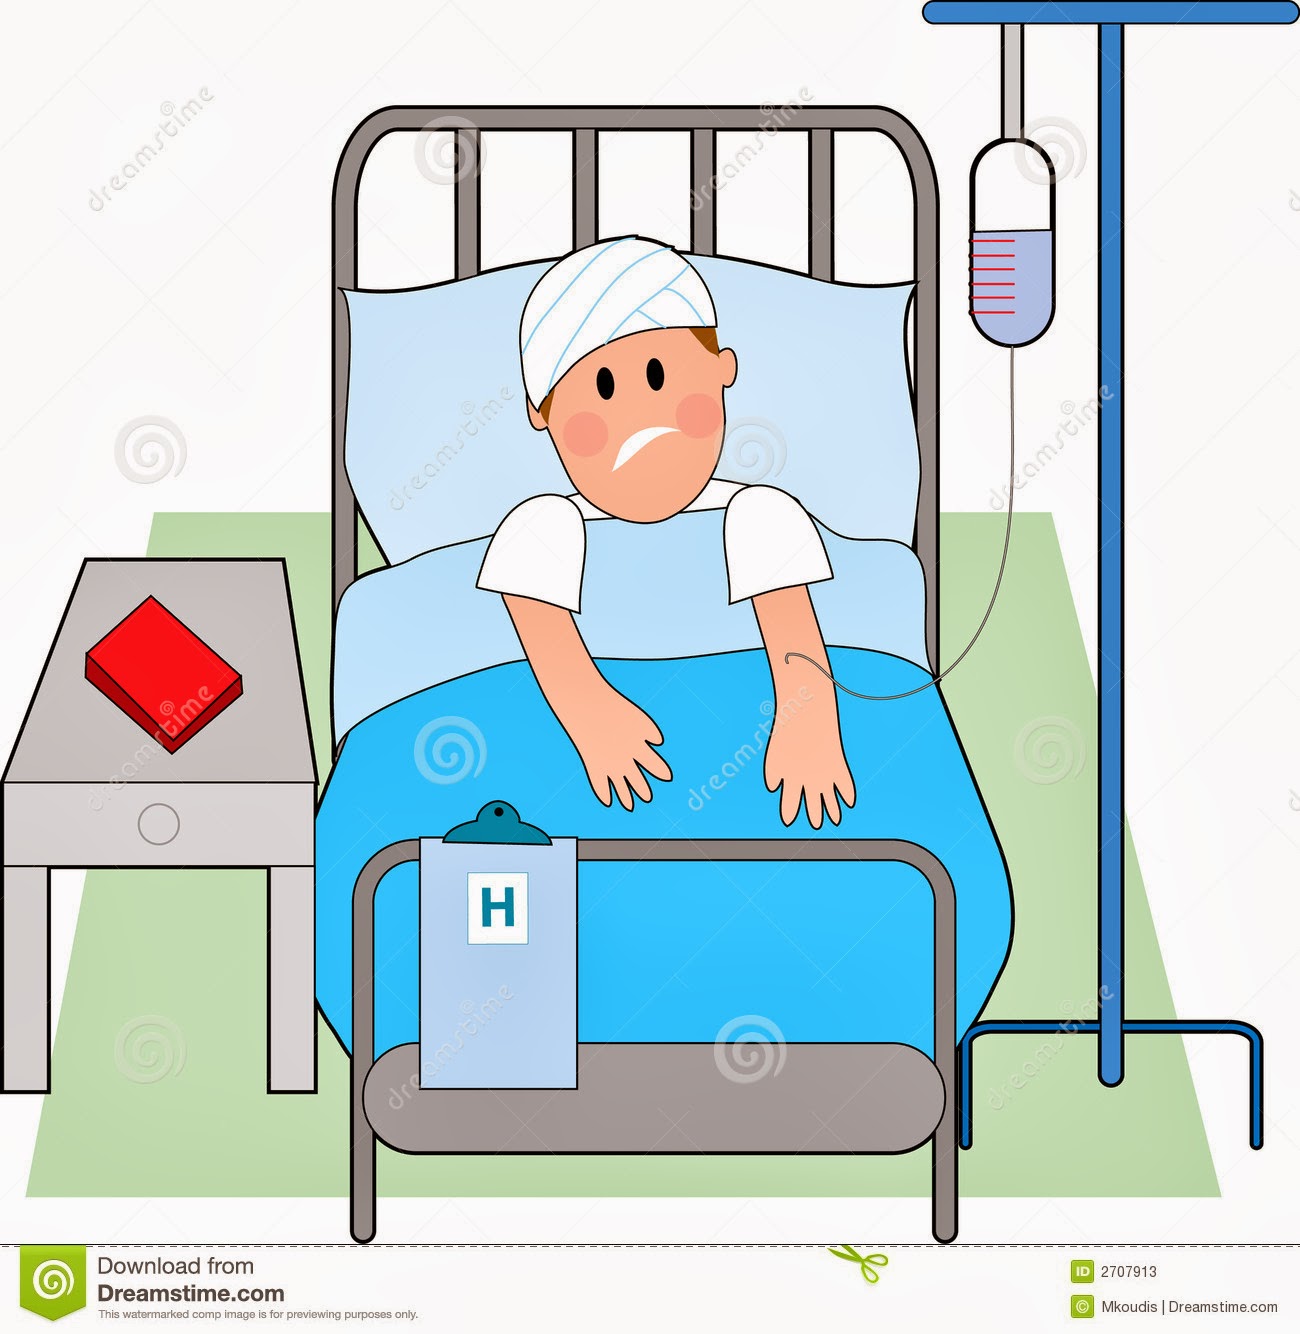 Displaying 20> Images For - Sick In Hospital Bed Cartoon...